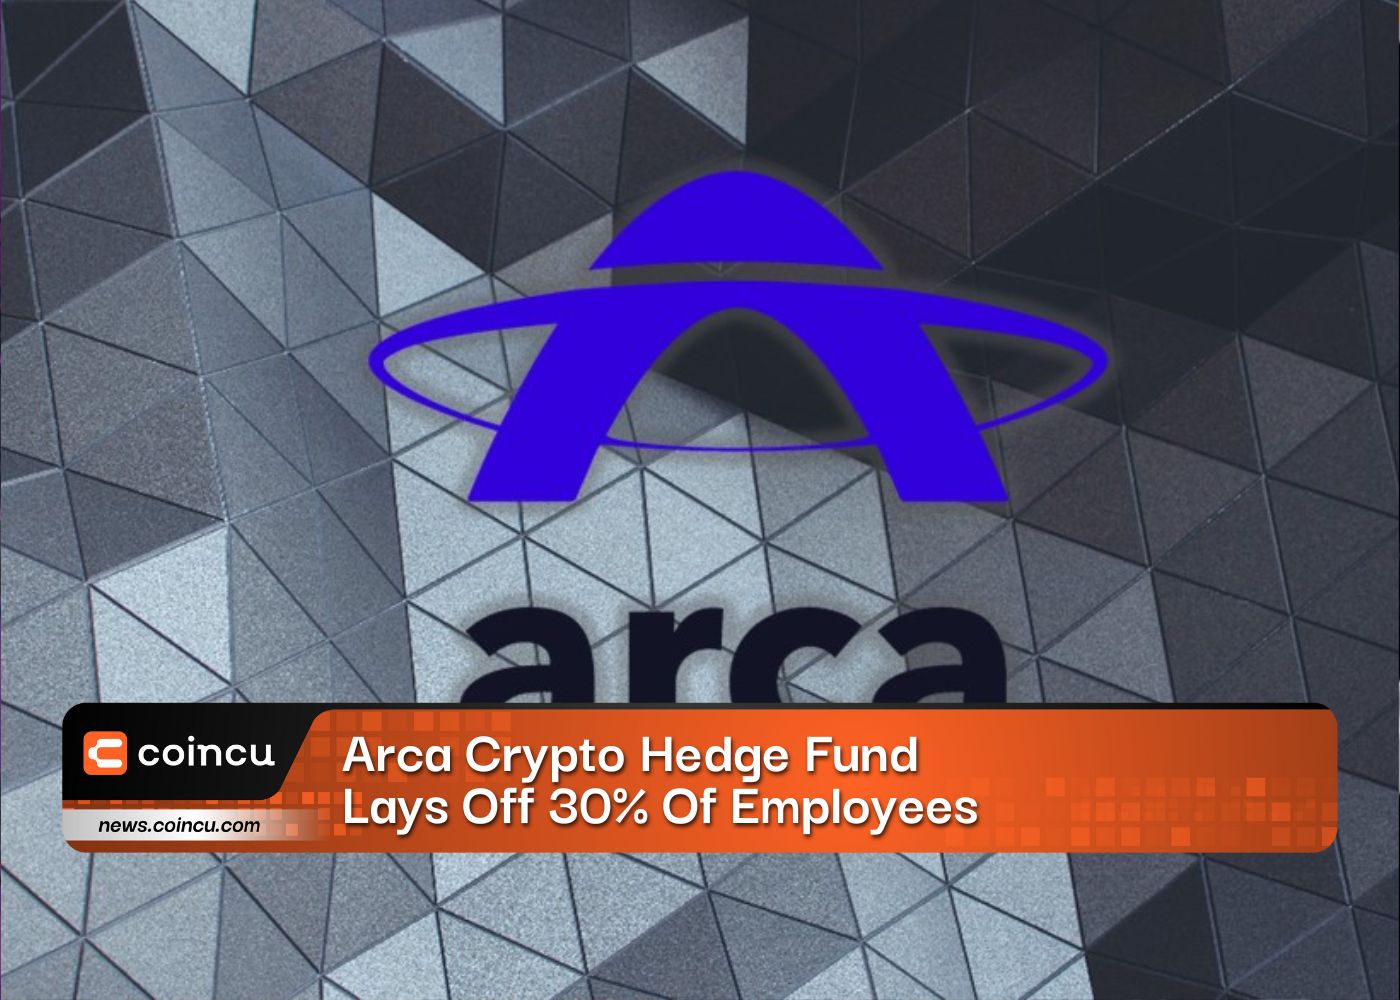 Arca Crypto Hedge Fund Lays Off 30% Of Employees